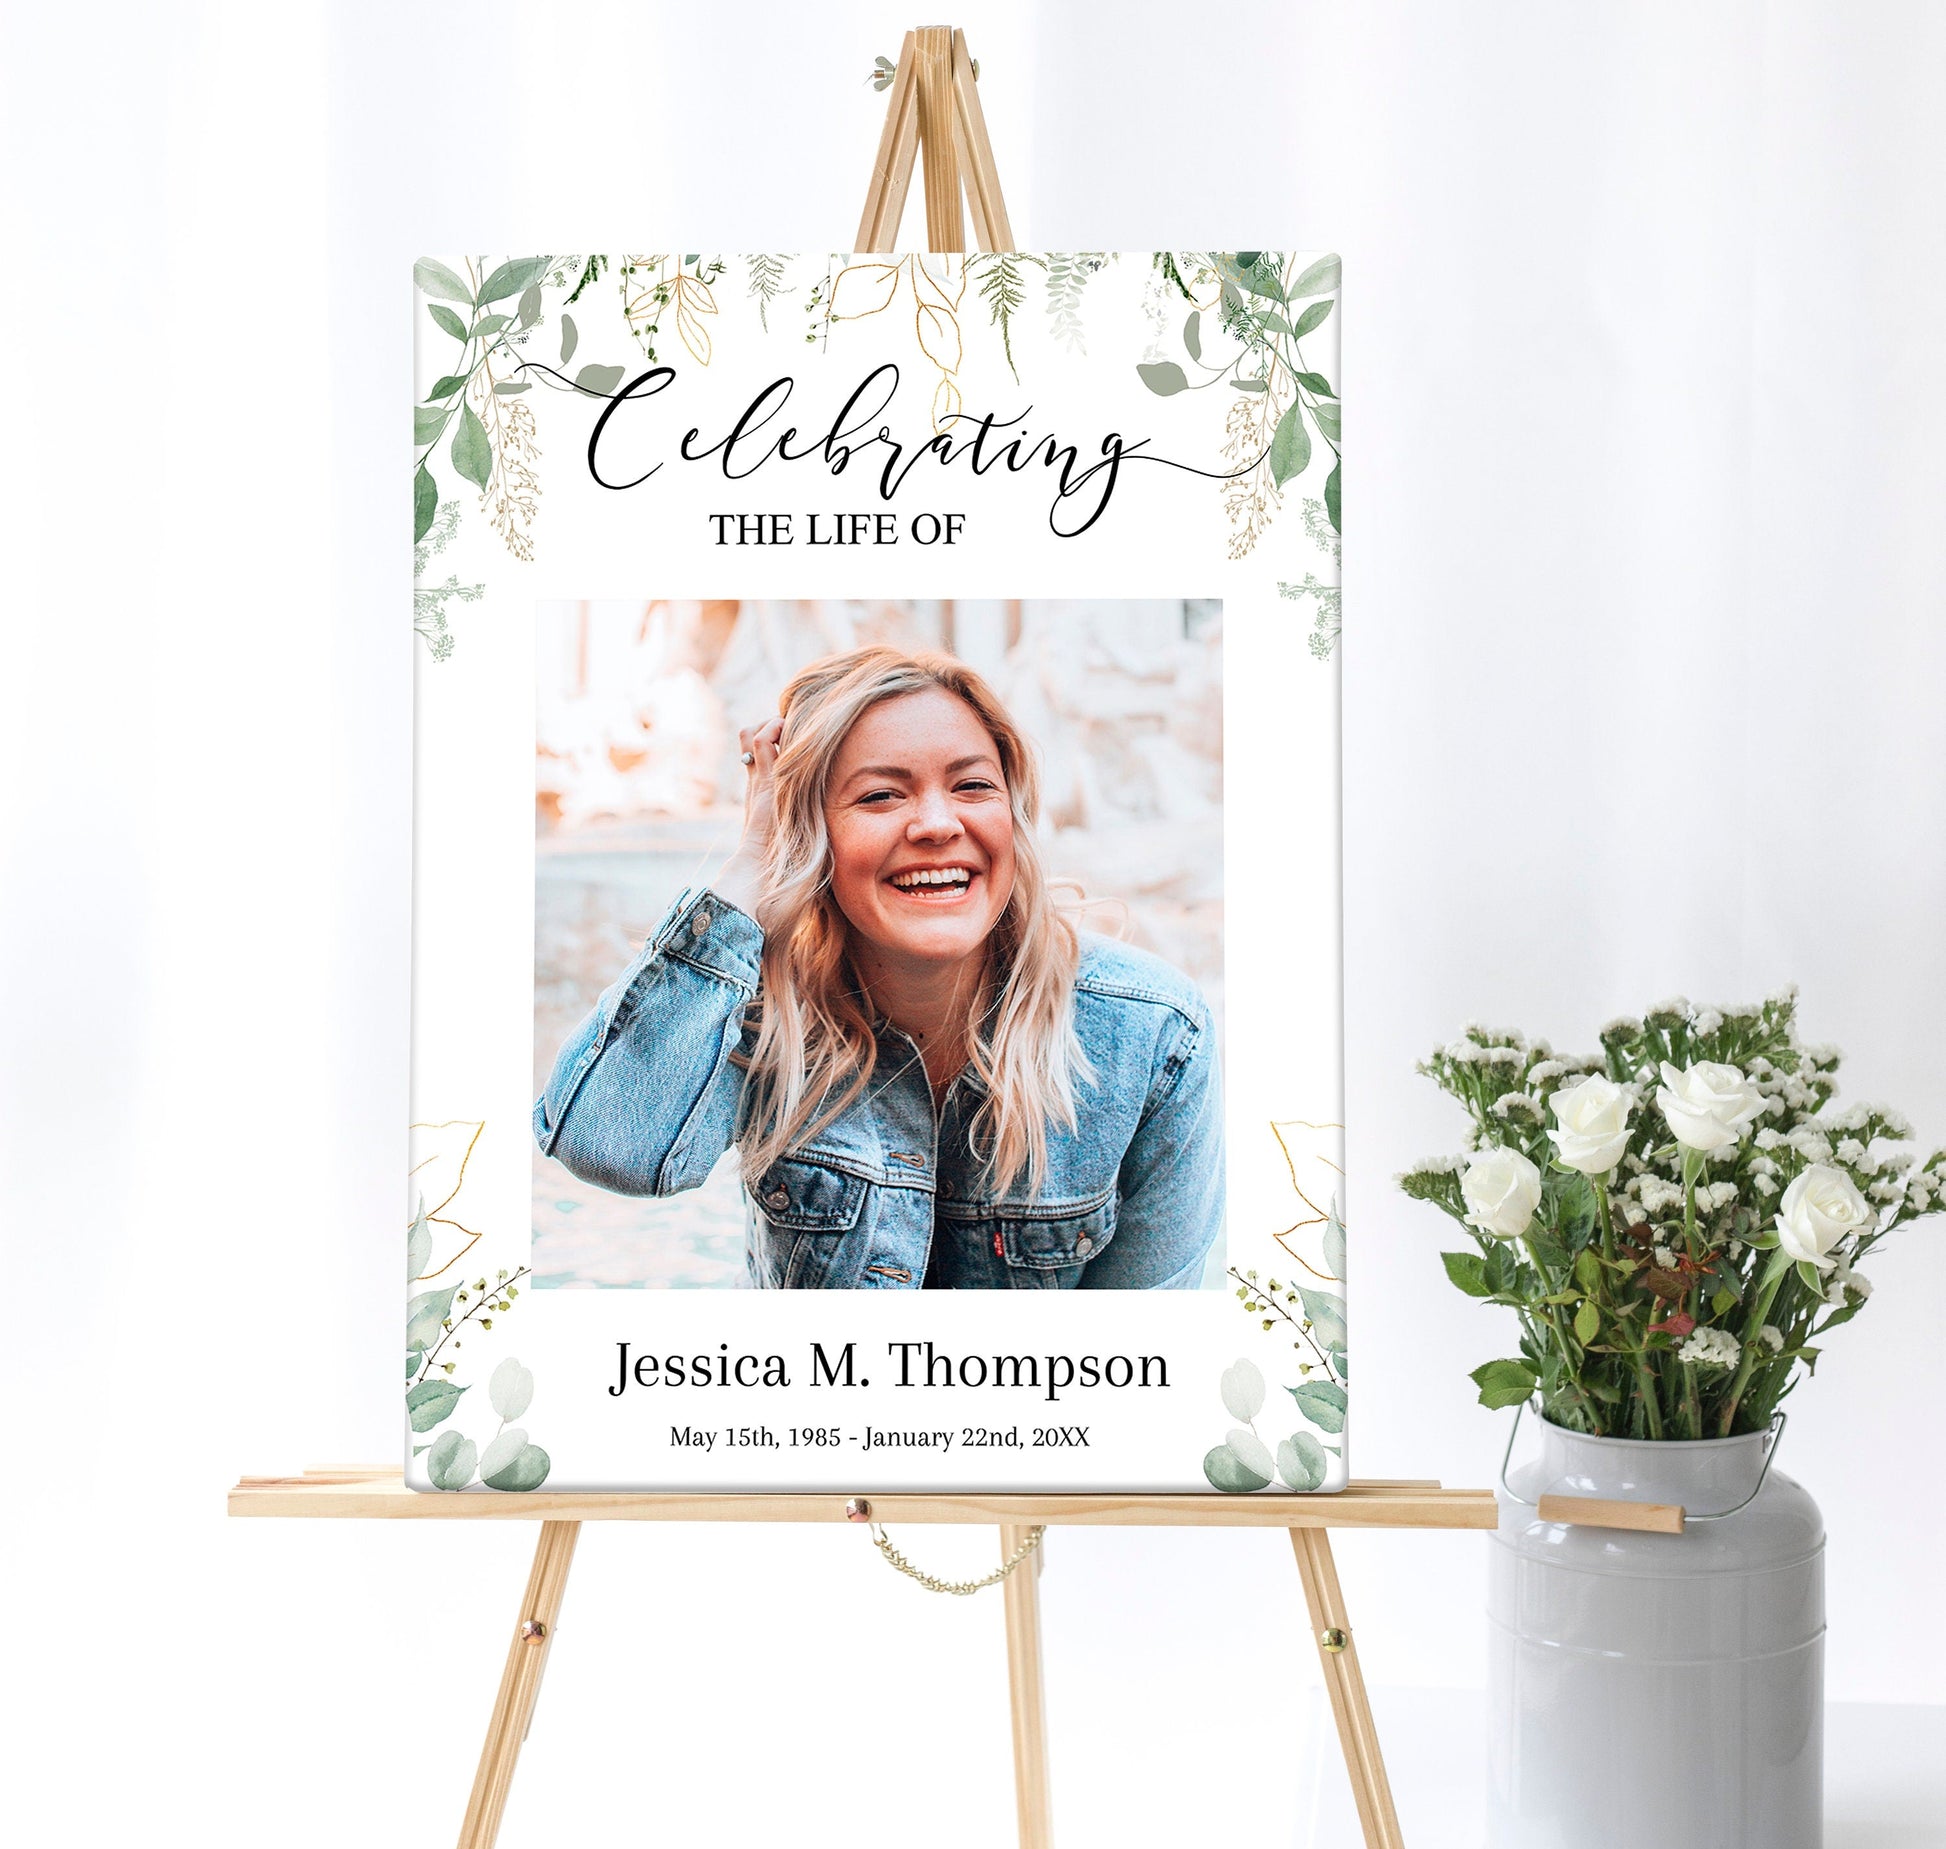 Funeral photo display poster with greenery next to vase